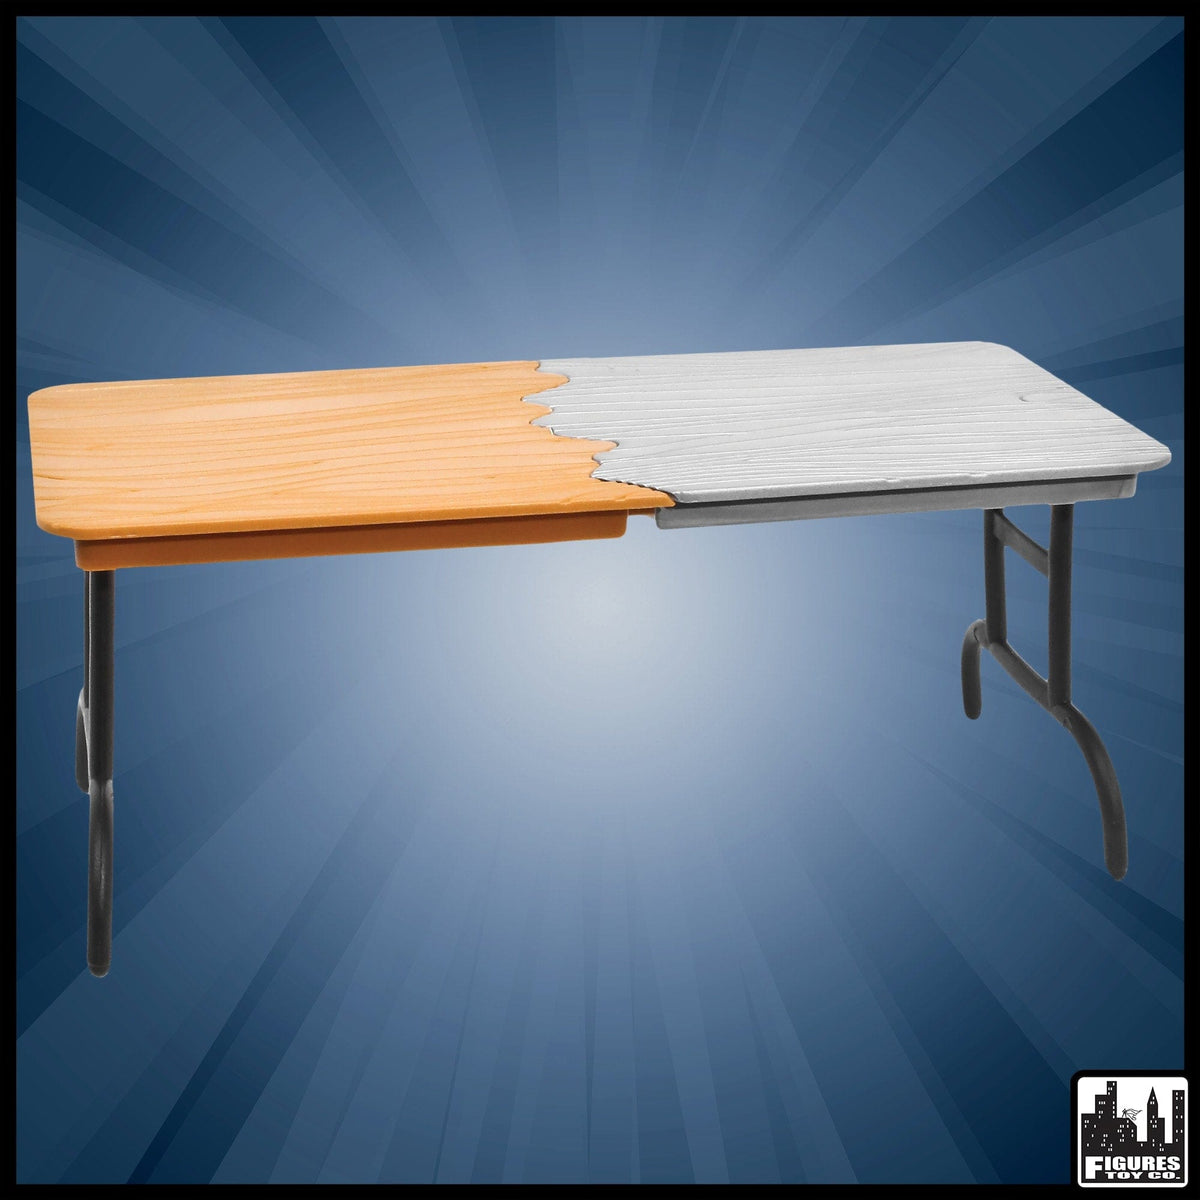 Half Brown &amp; Half Silver Breakable Table for WWE Wrestling Action Figures